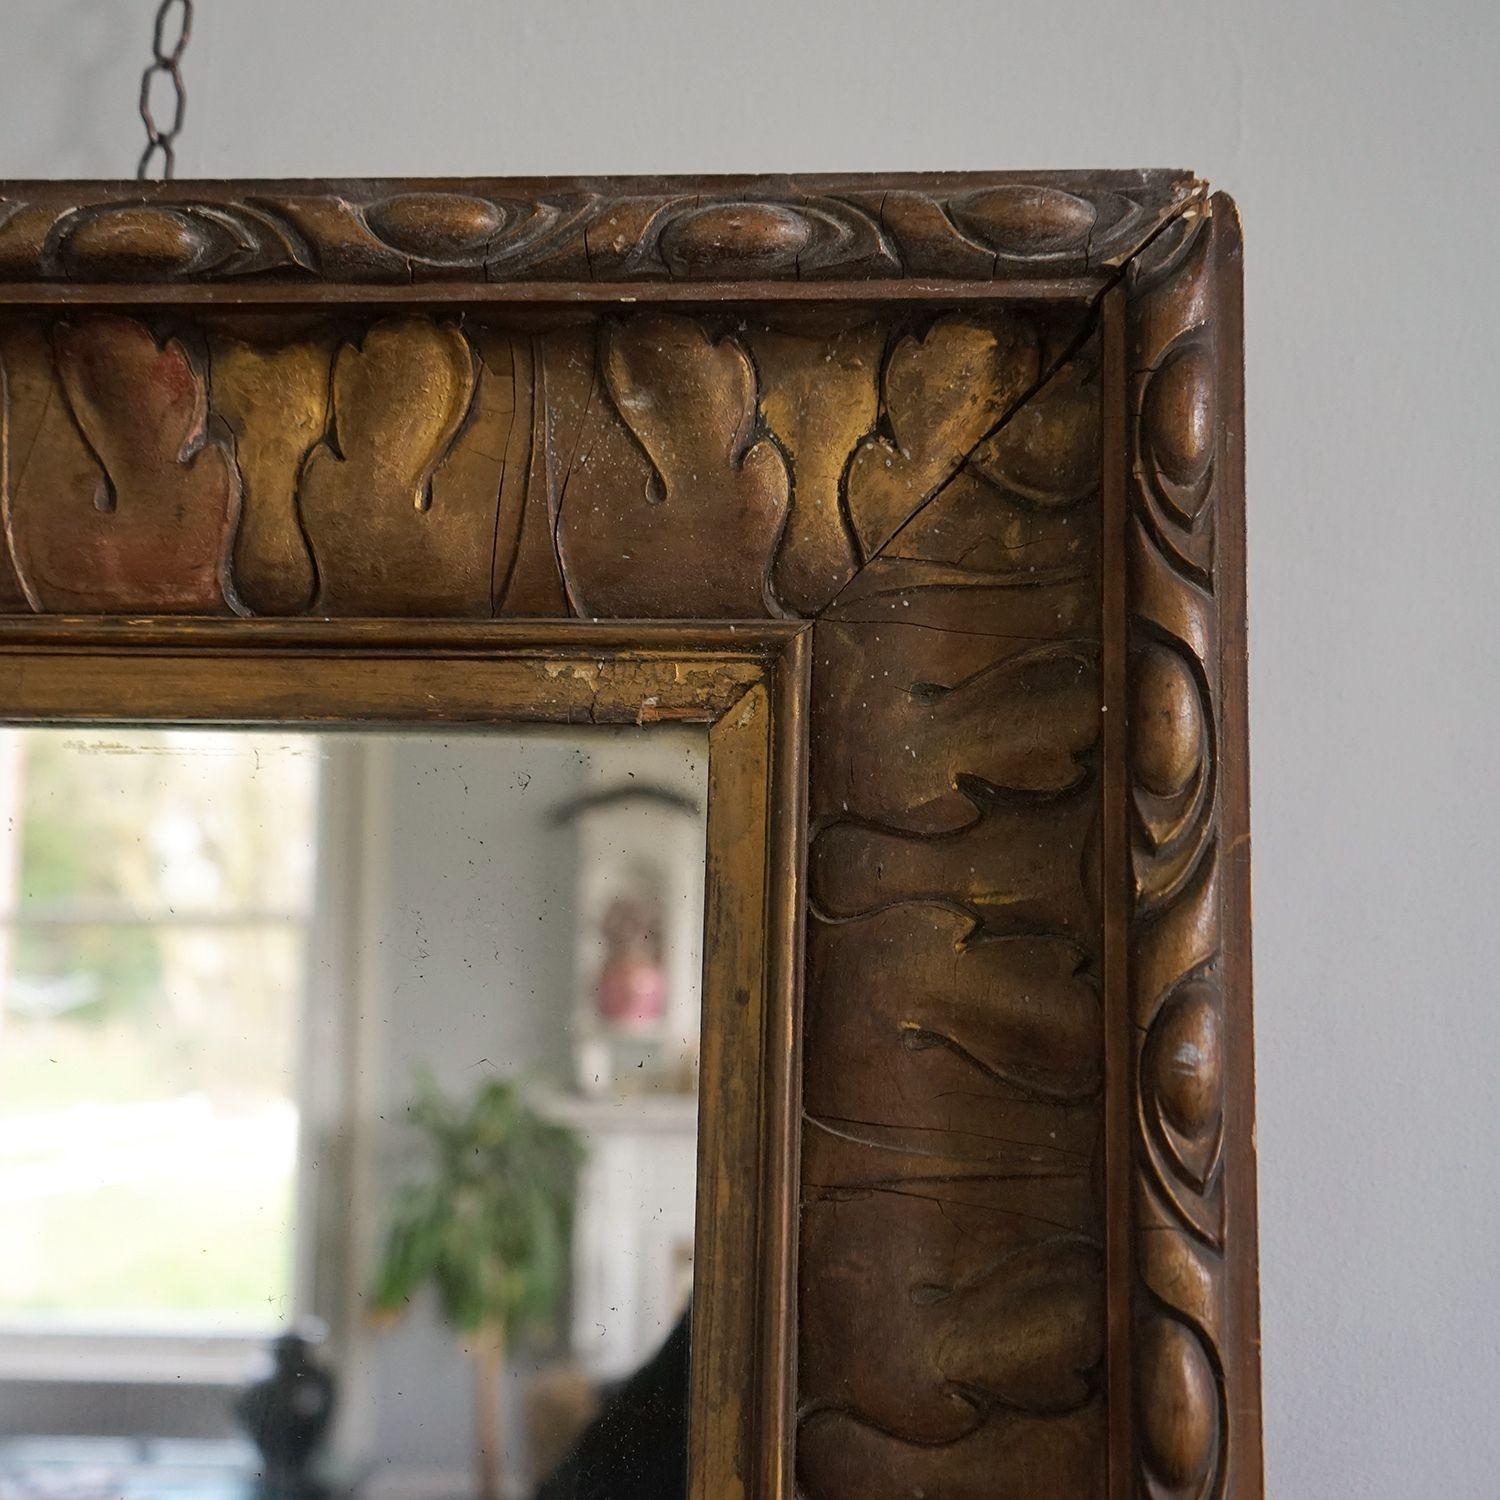 Antique Gilt Gessowall mirror

Simple yet beautiful stylised repeated acanthus leaf detail on the frame.

Original mercury mirror plate with plenty of sparkle, some pitting and wear but still a very usable mirror.

Condition wise it is worn in